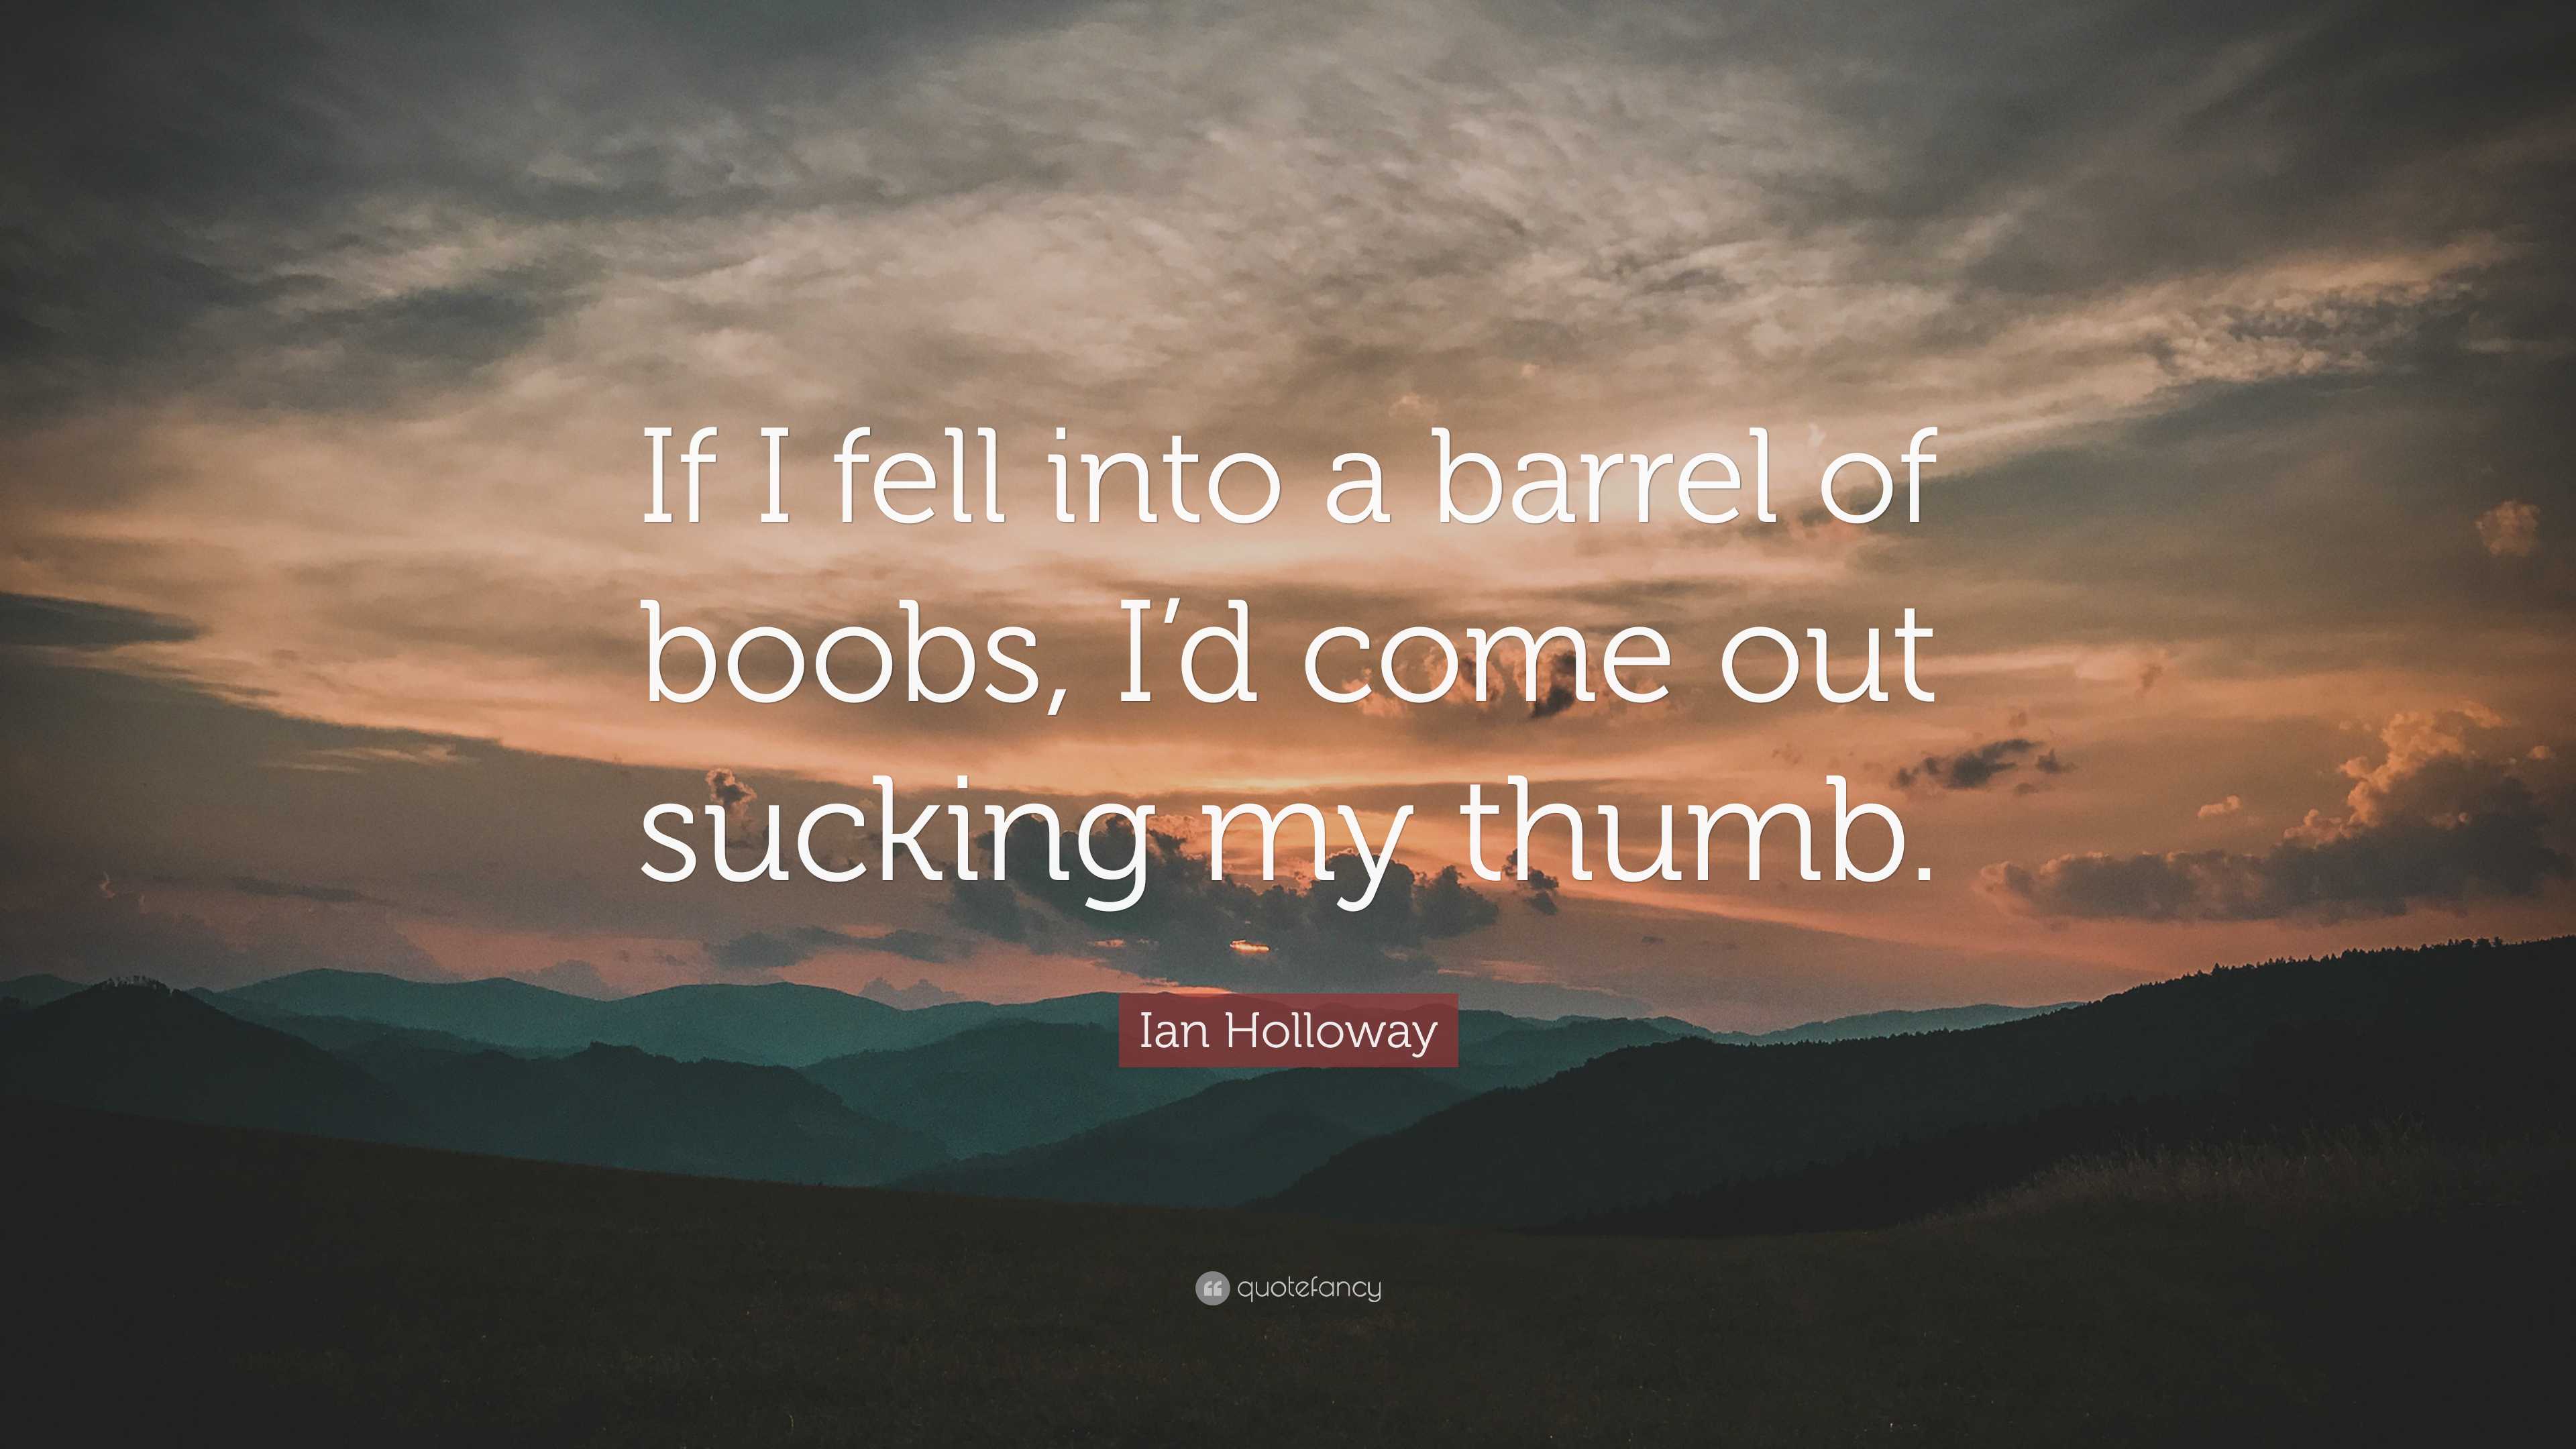 Ian Holloway Quote: “If I fell into a barrel of boobs, I'd come out sucking